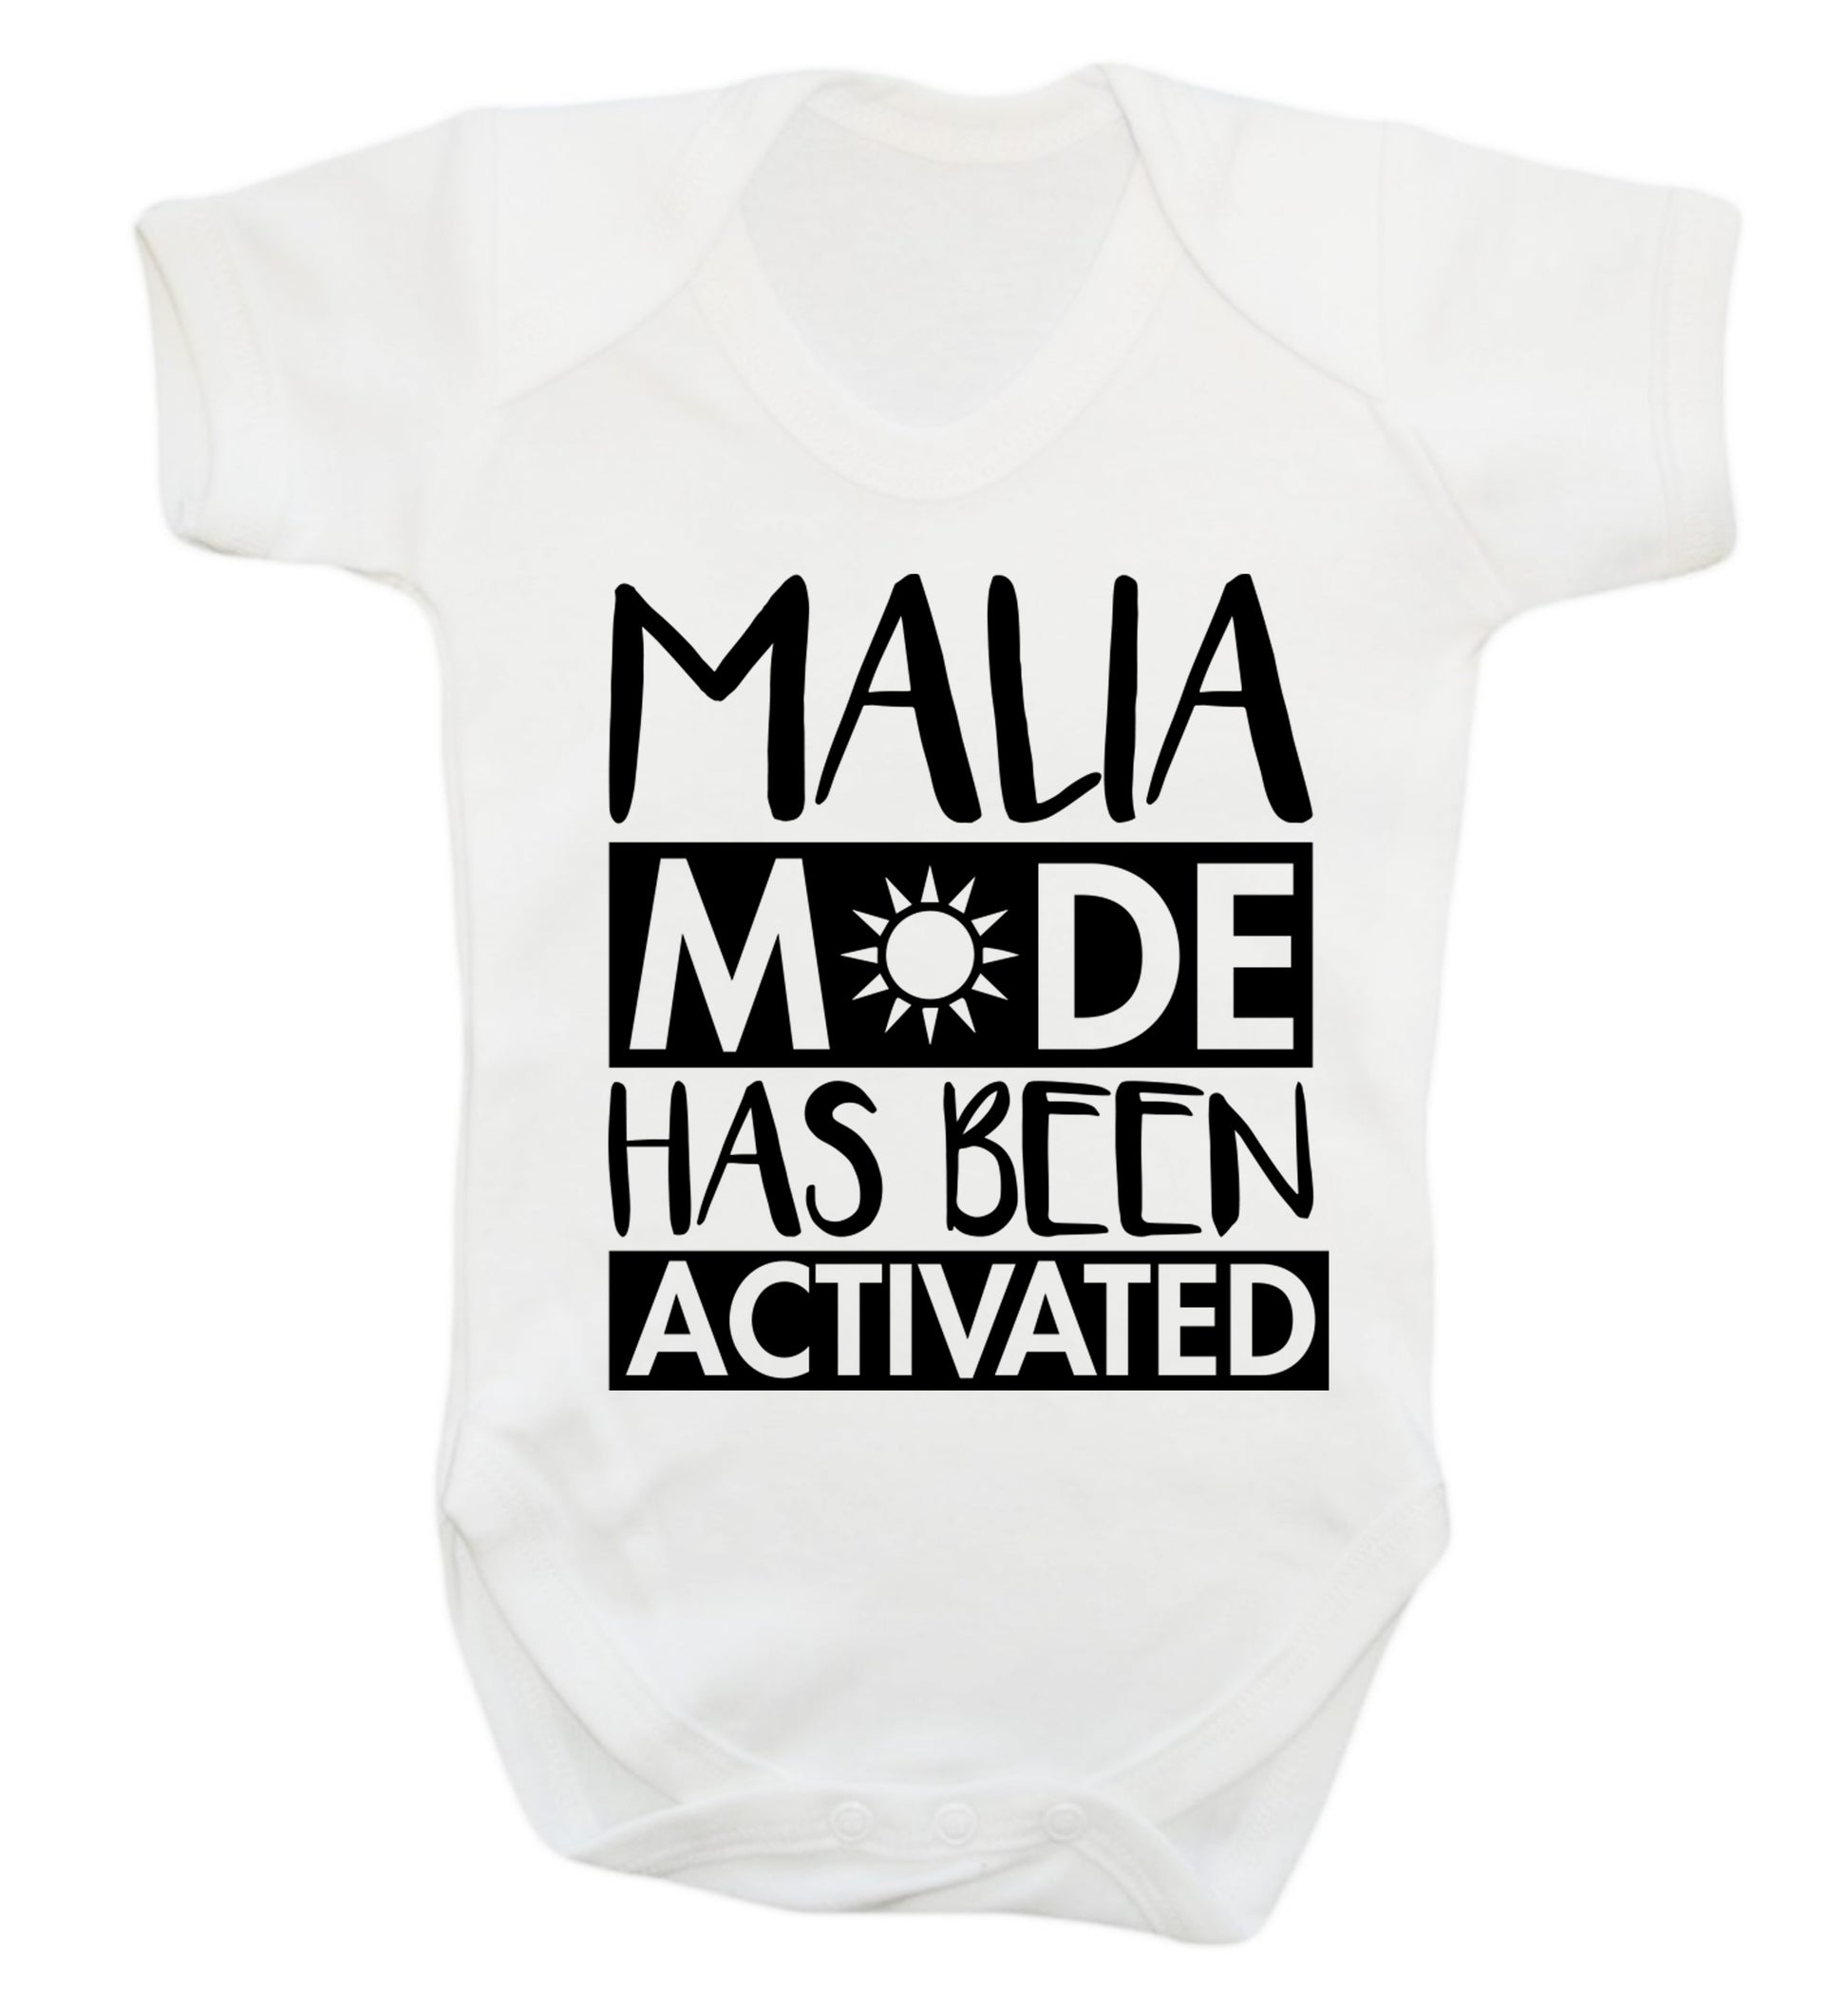 Malia mode has been activated Baby Vest white 18-24 months